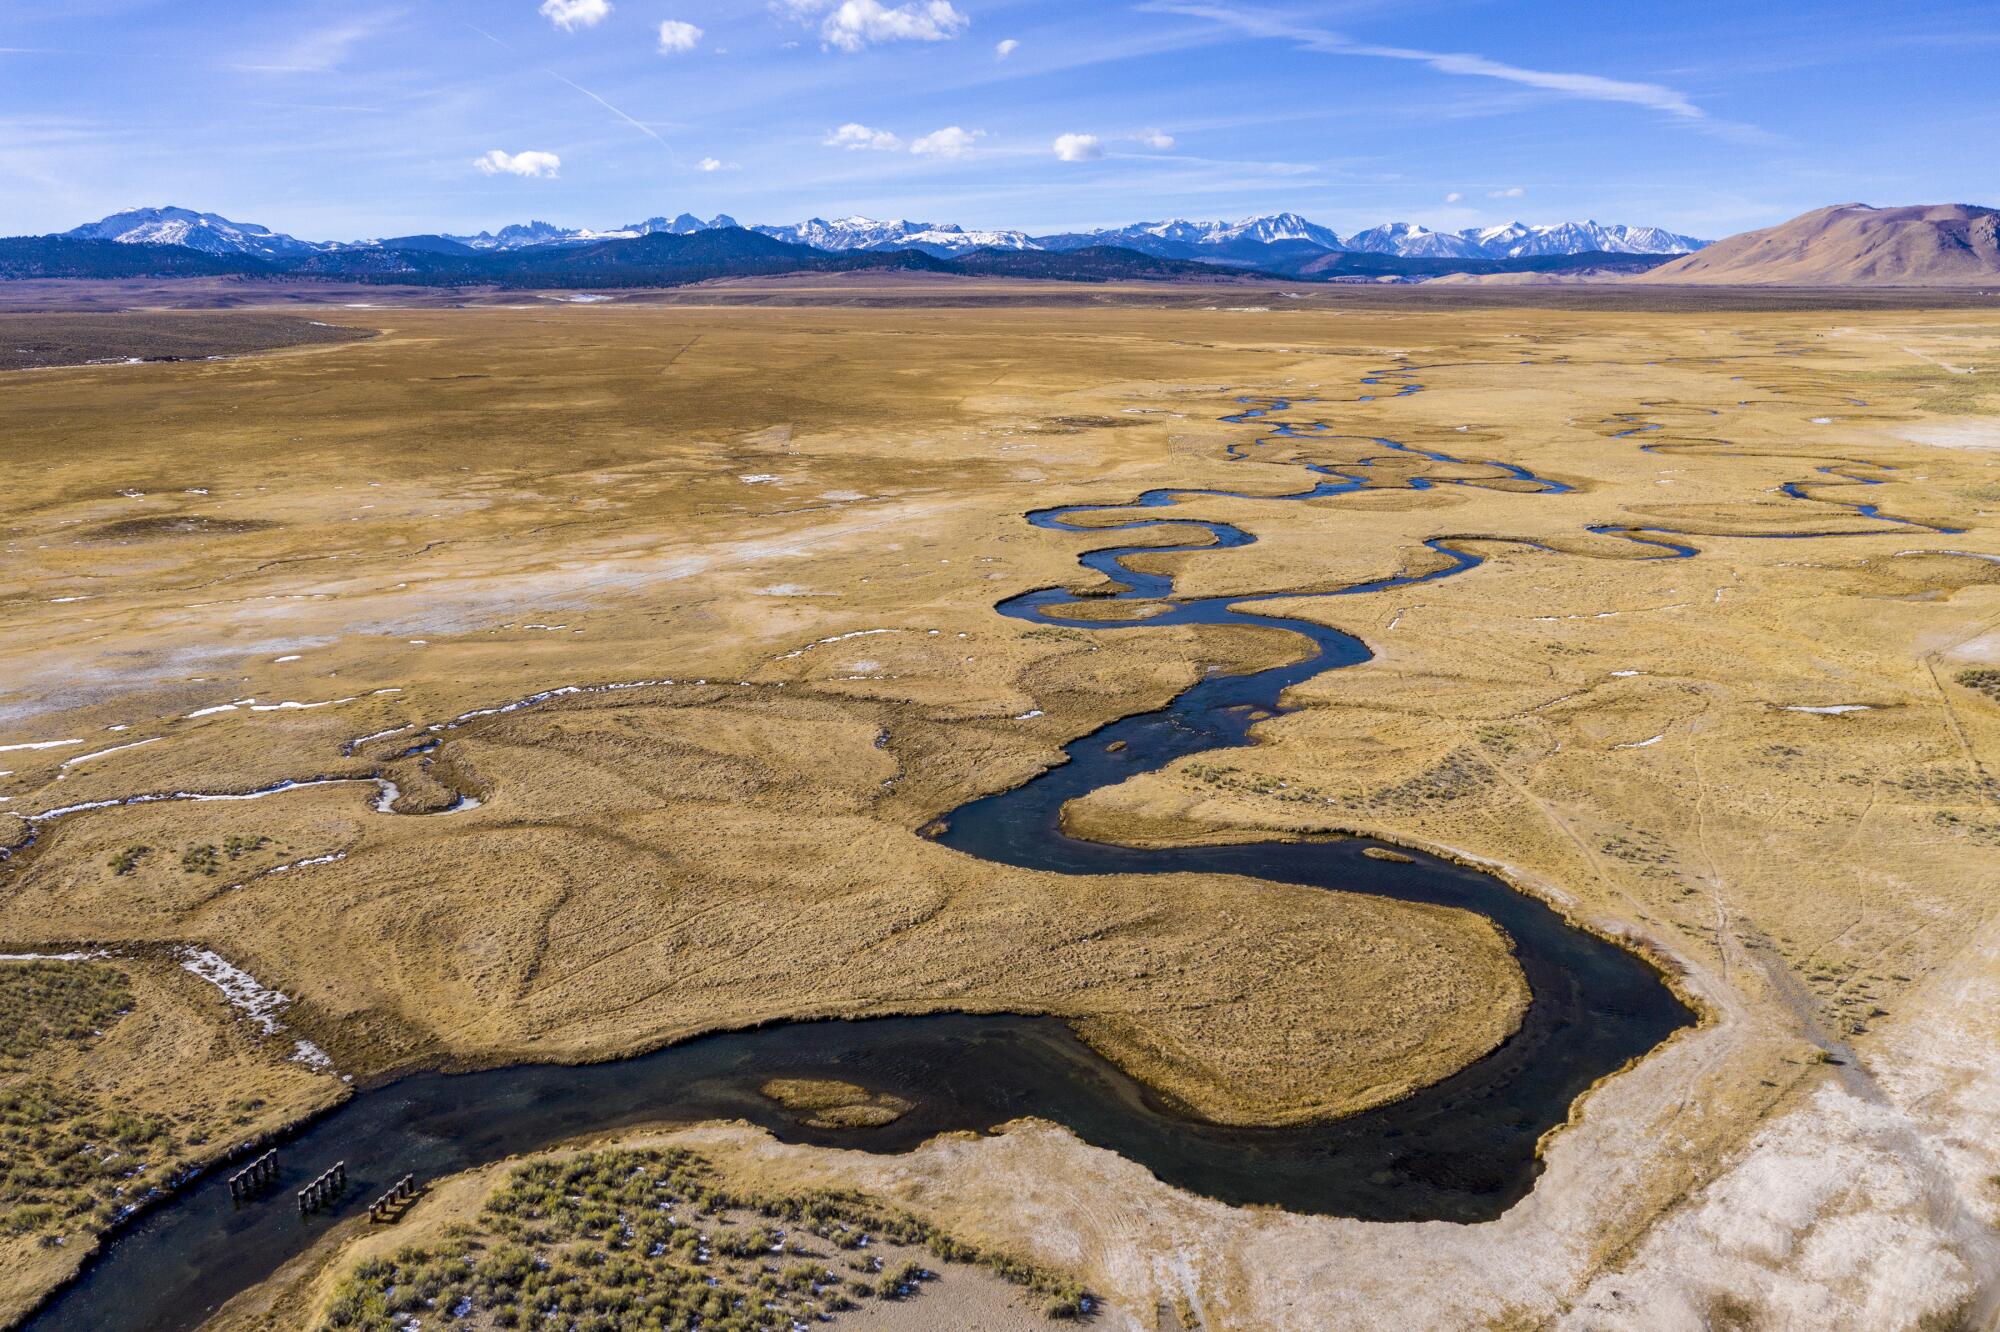 The Owens River flows through wetlands and pastures near Benton Crossing.